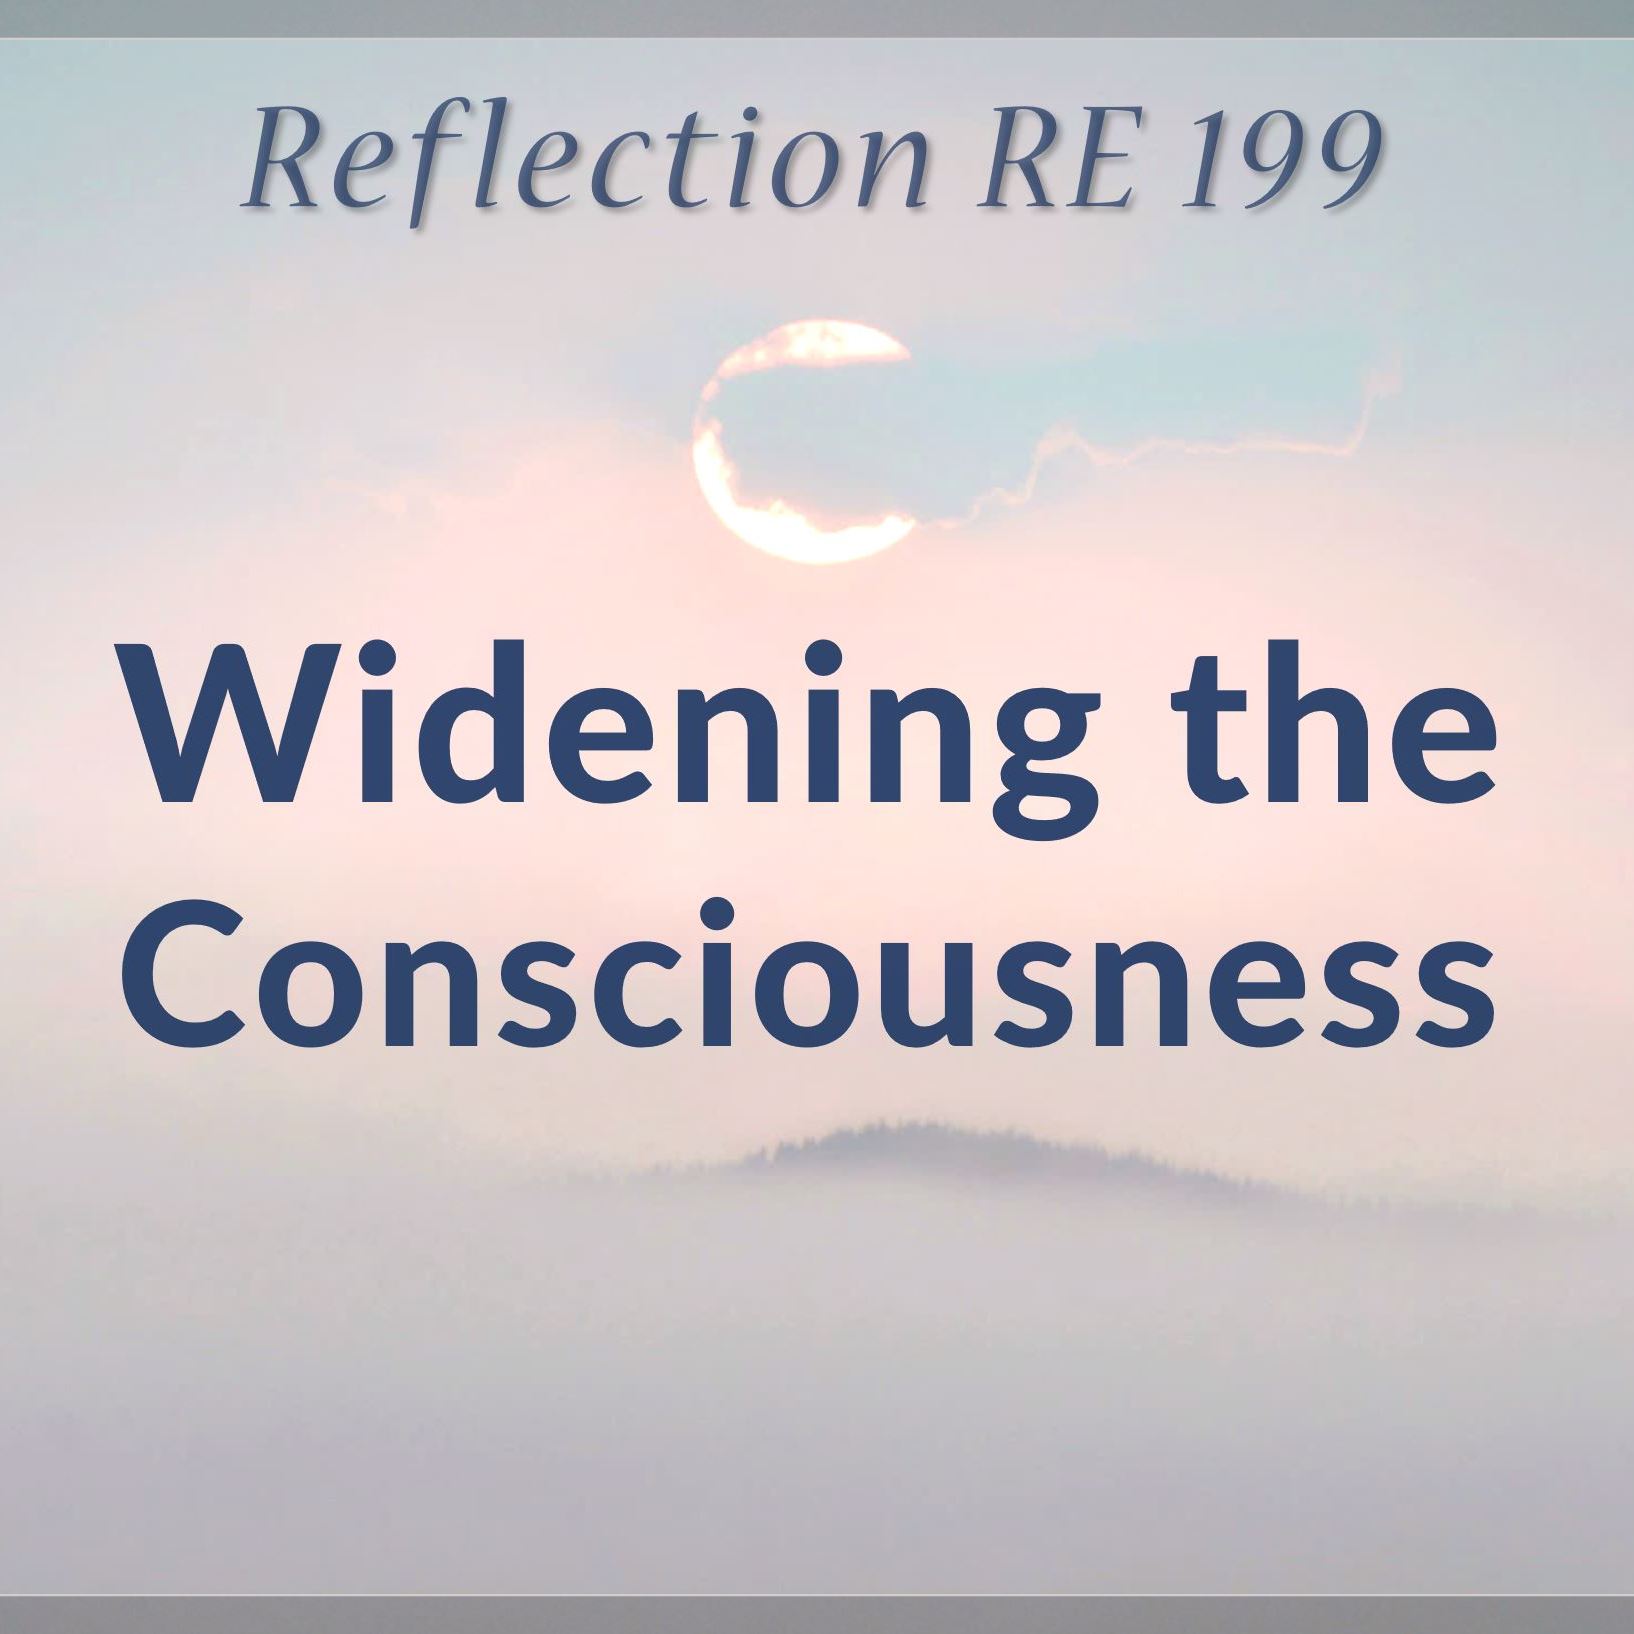 Widening the Consciousness  |  RE 199